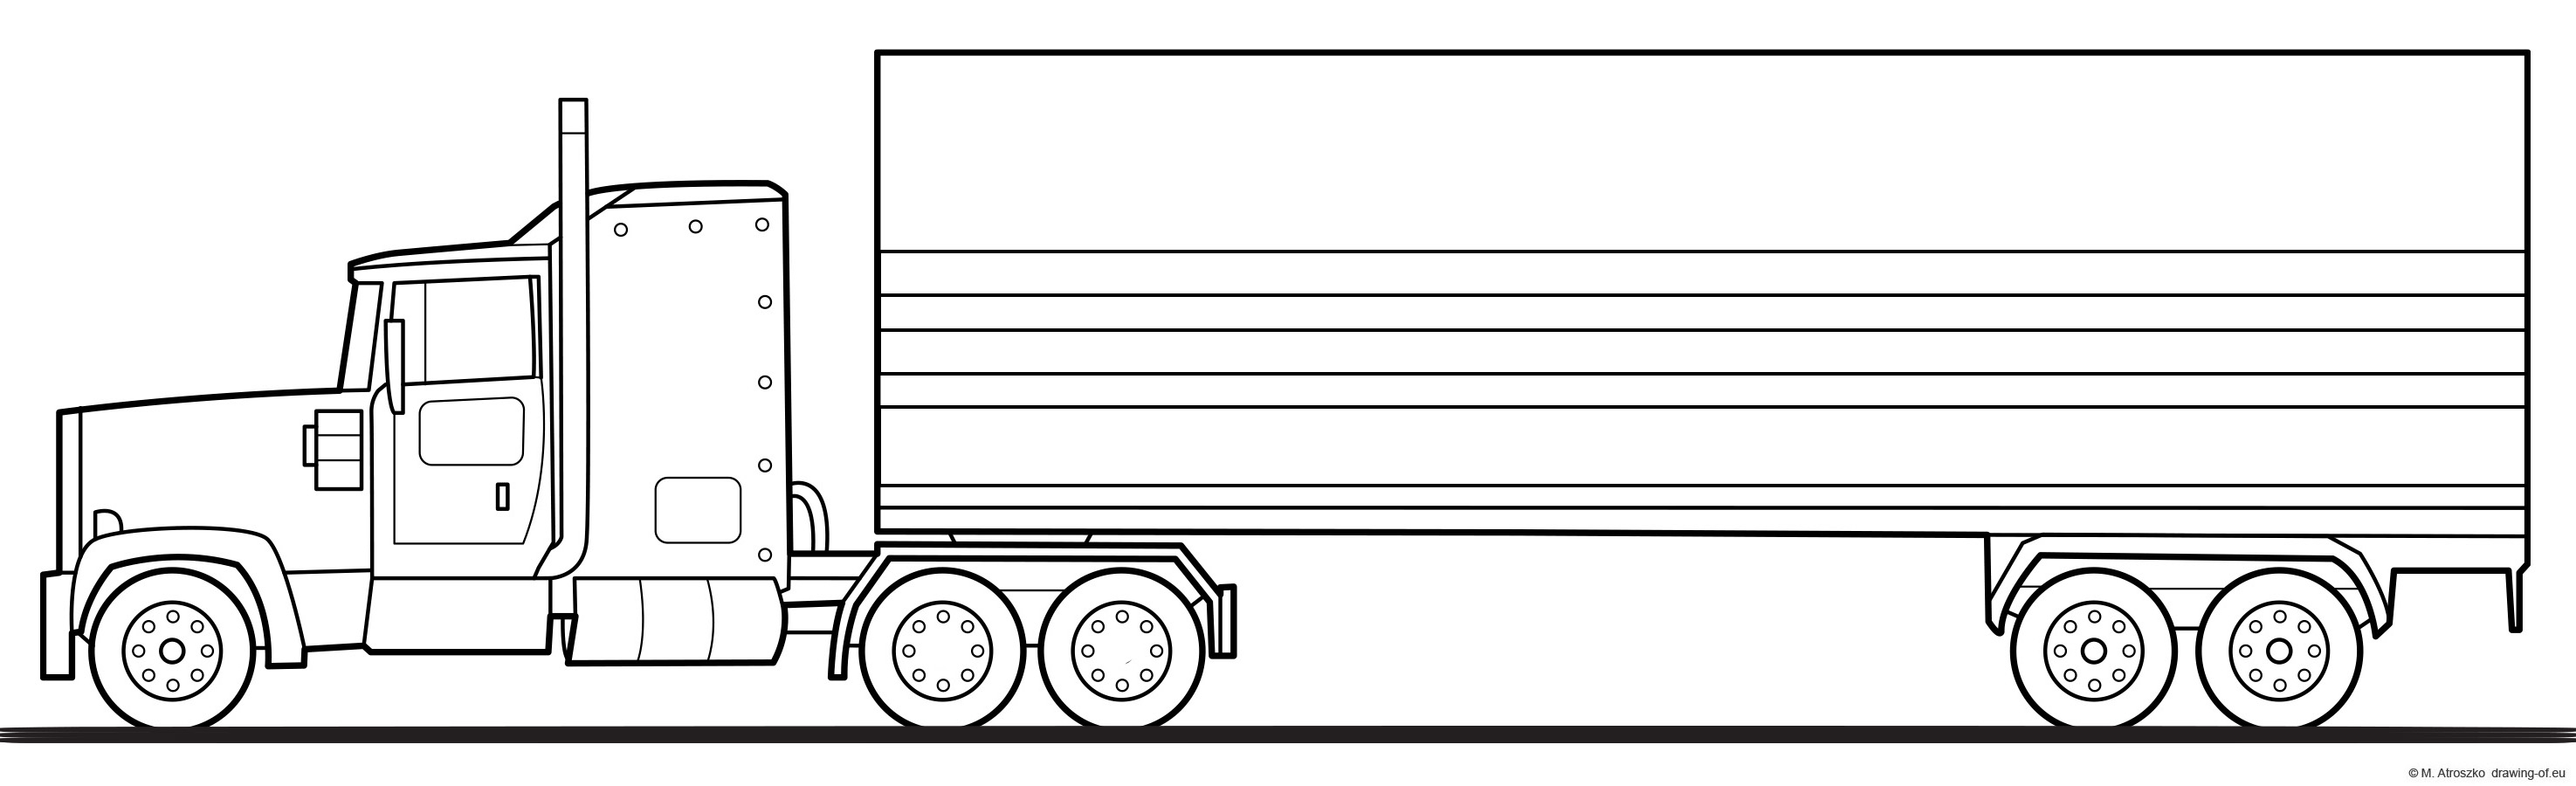 truck trailer drawing